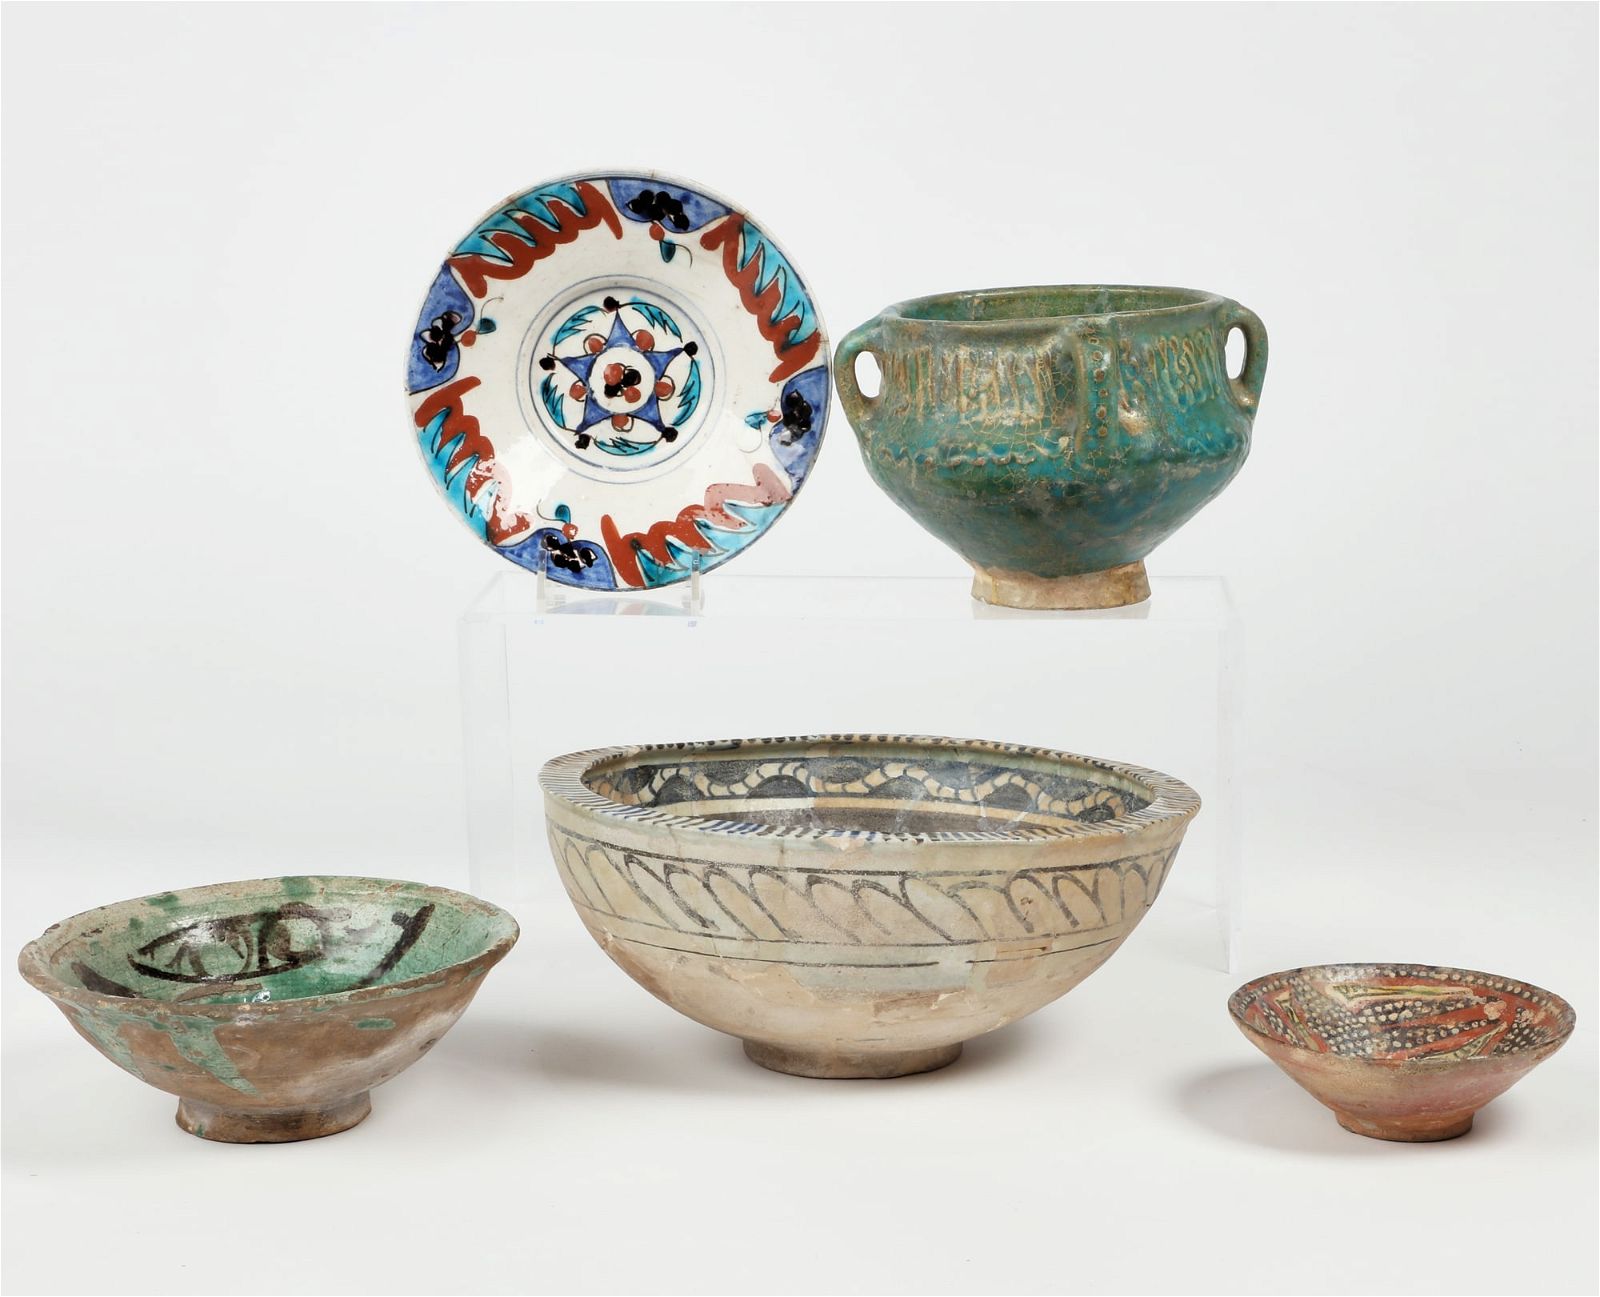 FIVE MIDDLE EASTERN POTTERY BOWLSA